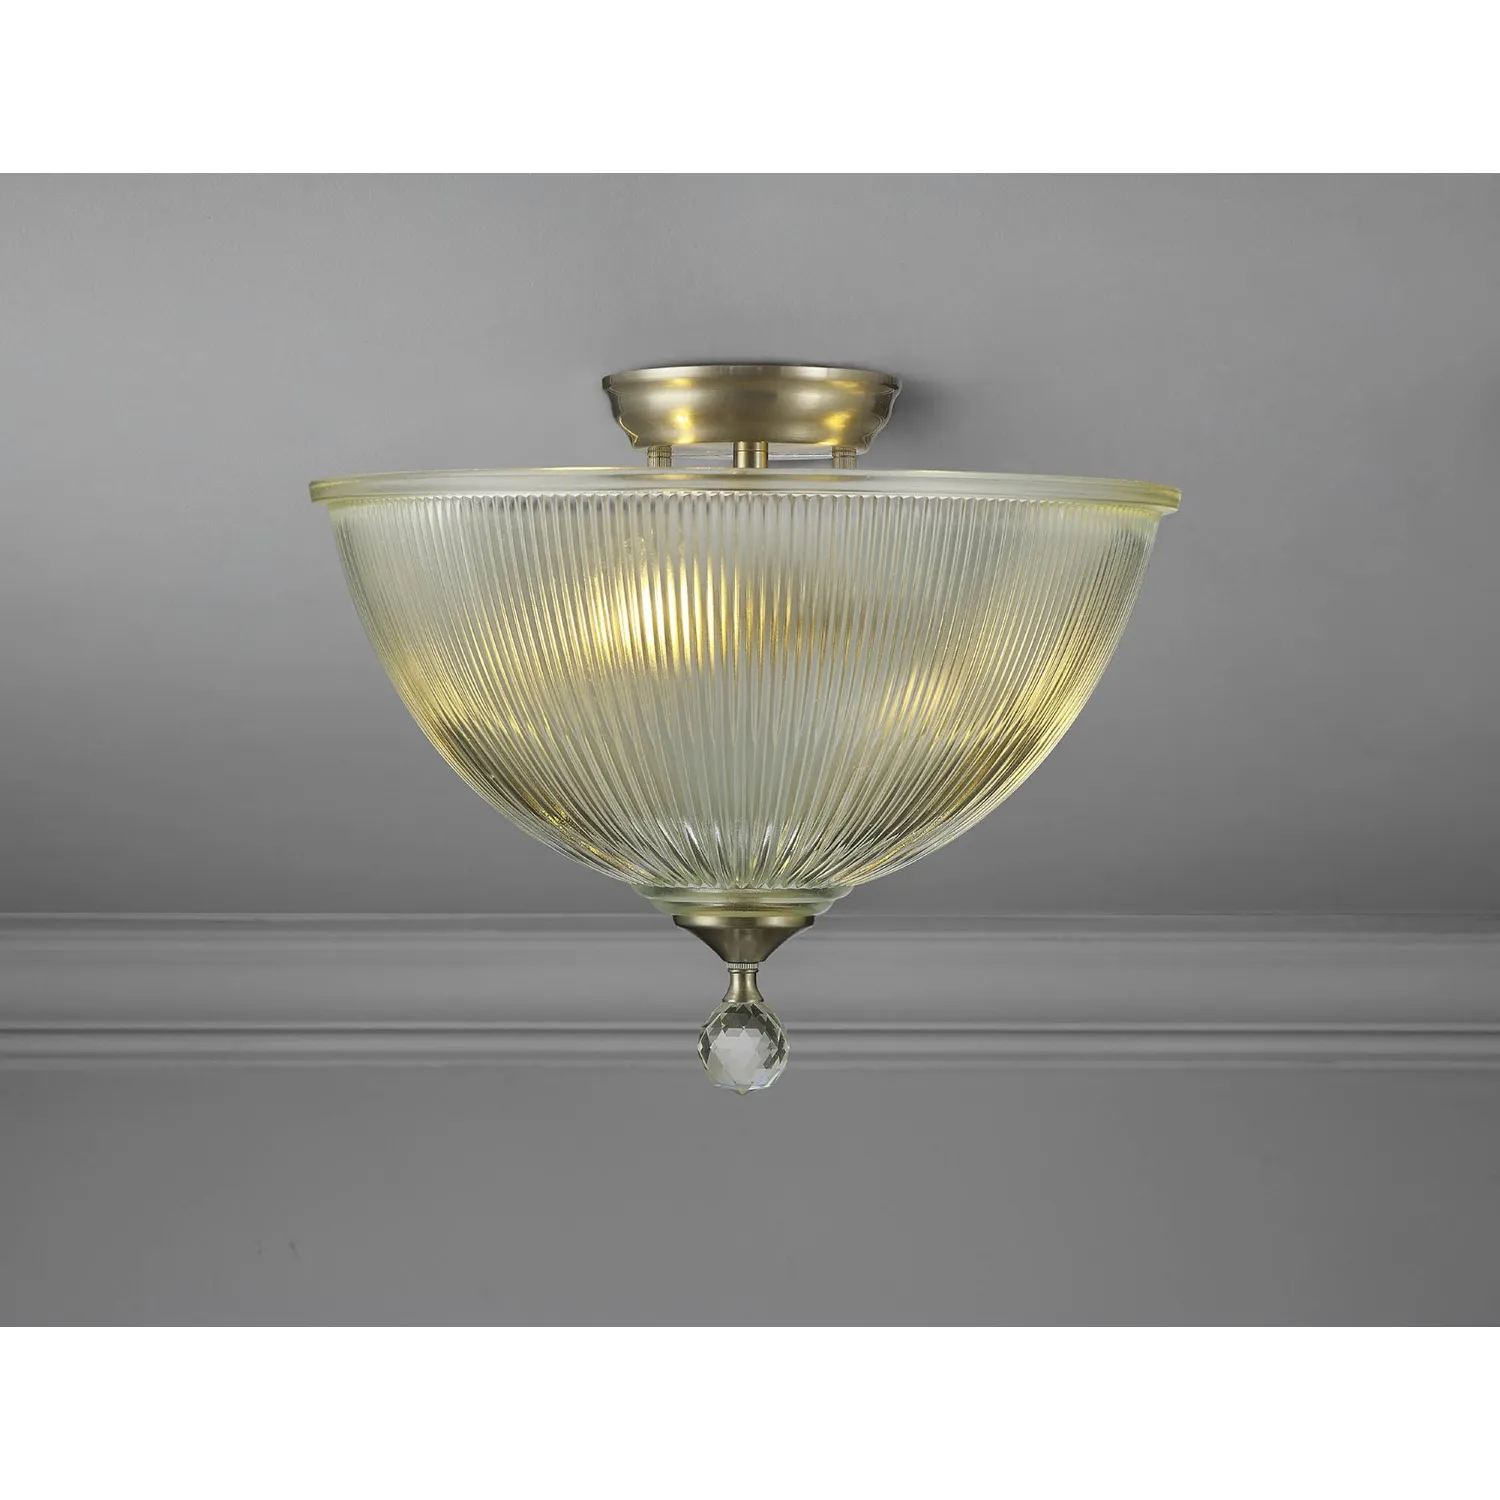 Billericay 2 Light Semi Flush Ceiling E27 With Dome 38cm Glass Shade Satin Nickel Clear